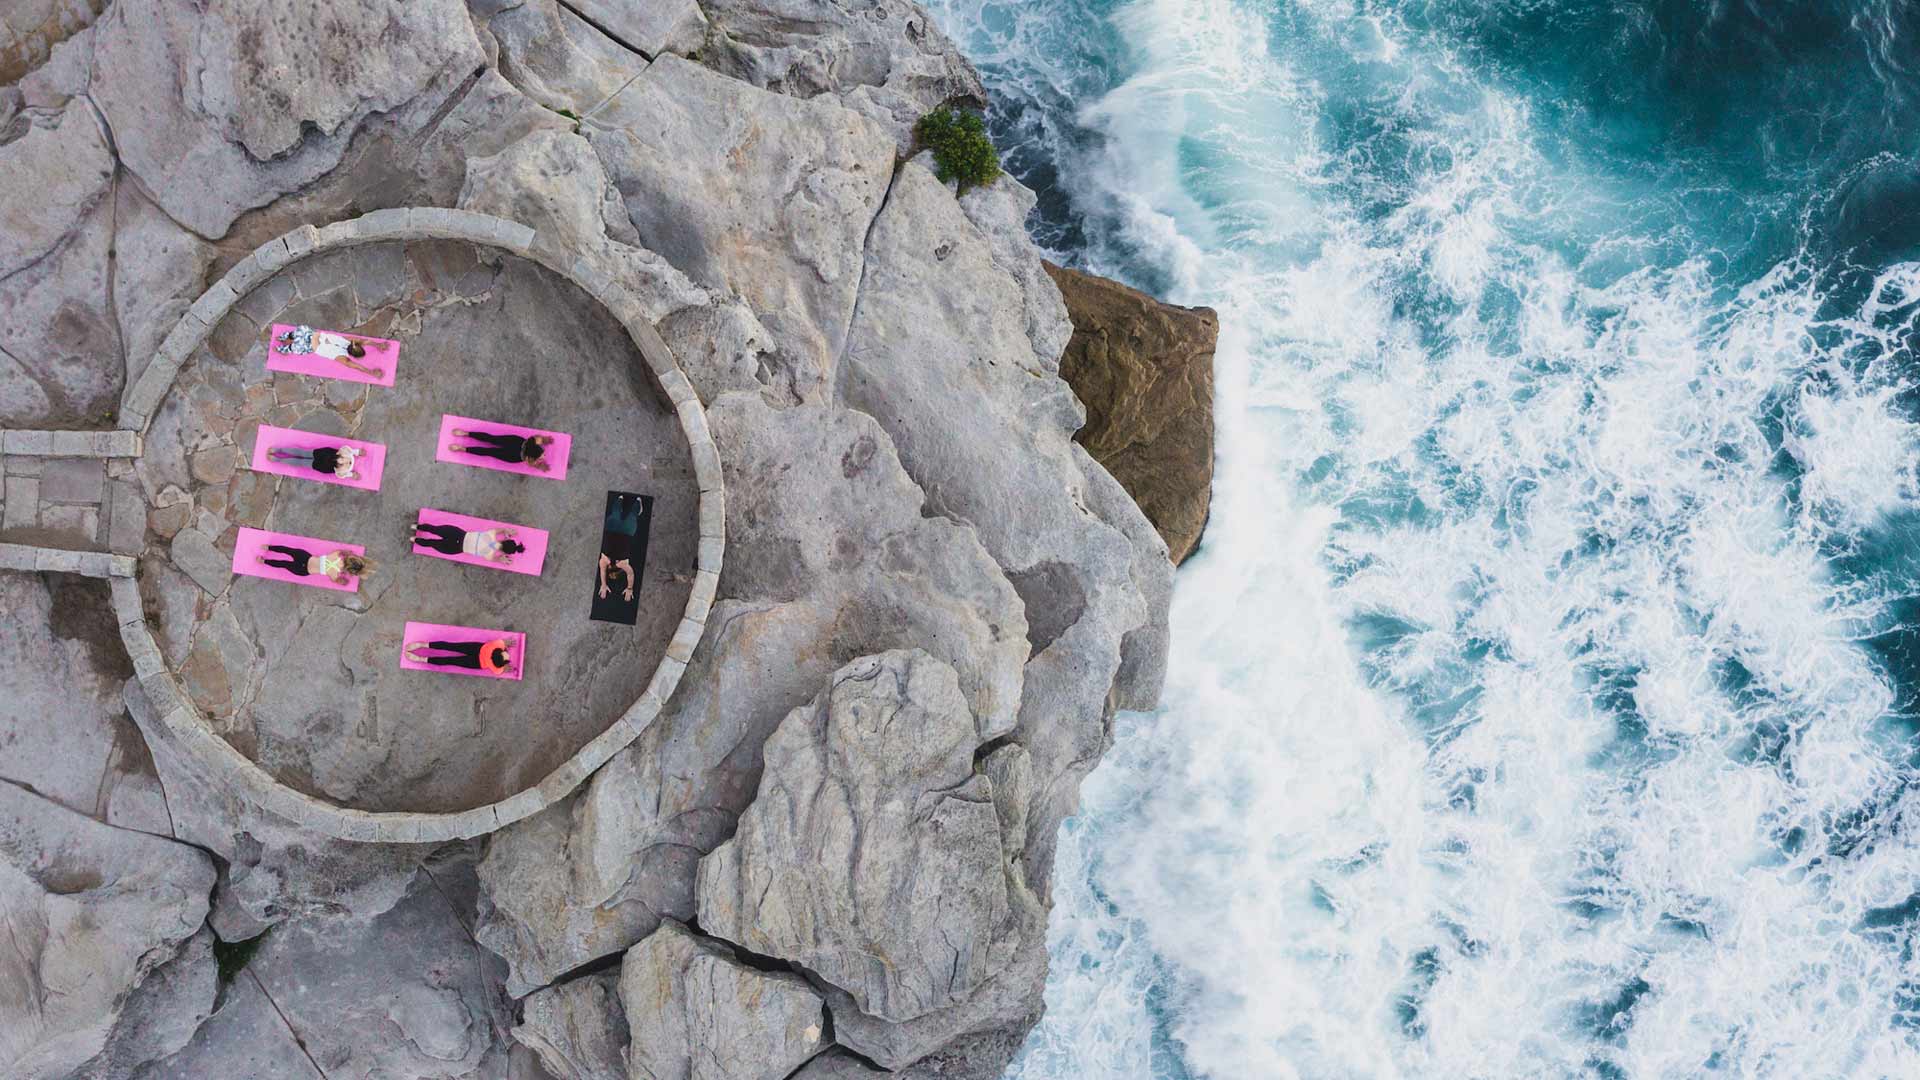 This Easygoing Yoga Group Is Running Affordable Outdoor Classes All Over Sydney